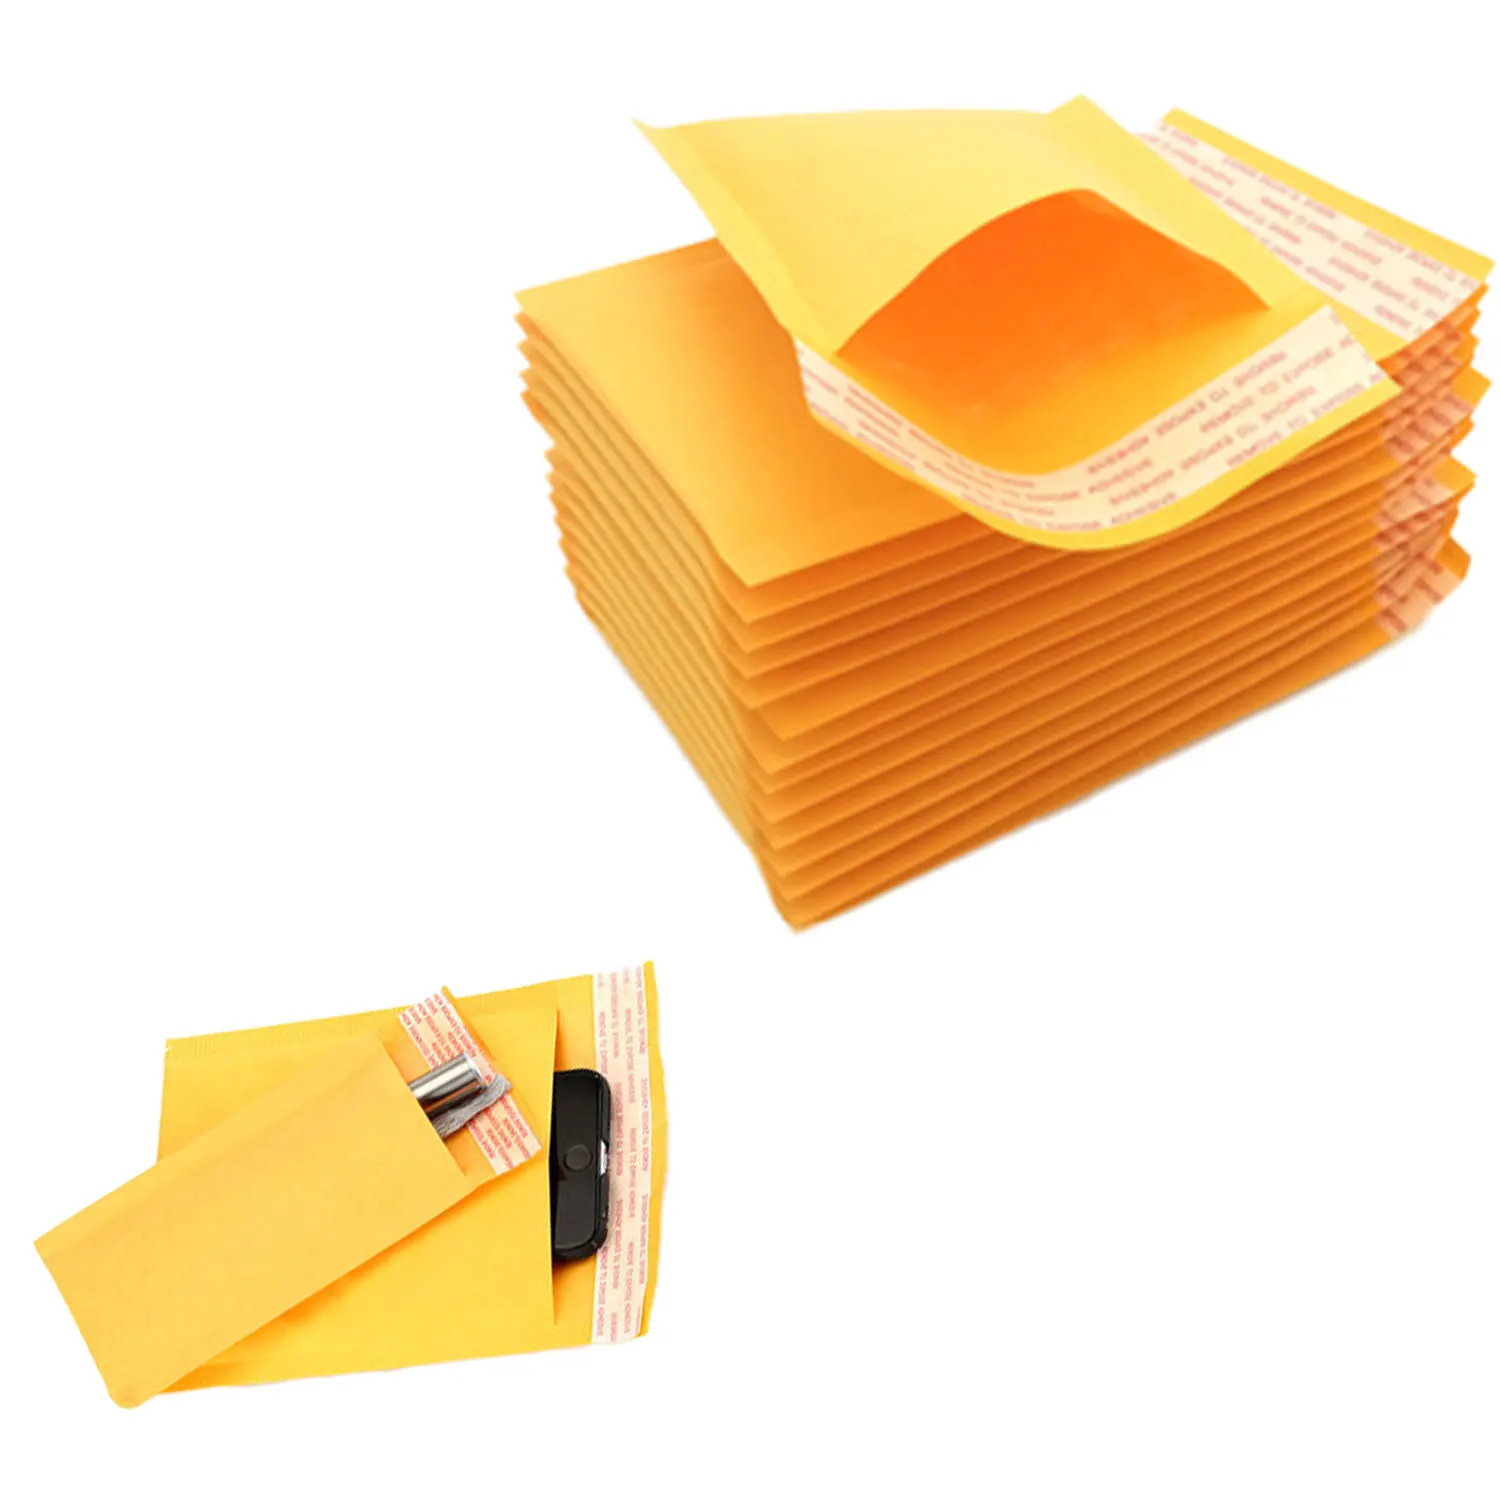 

13*16CM 50pcs/lot Bubble Envelope Bag Yellow Bubble PolyMailer Self Seal Mailing Bags Padded Envelopes For Magazine Lined Mailer